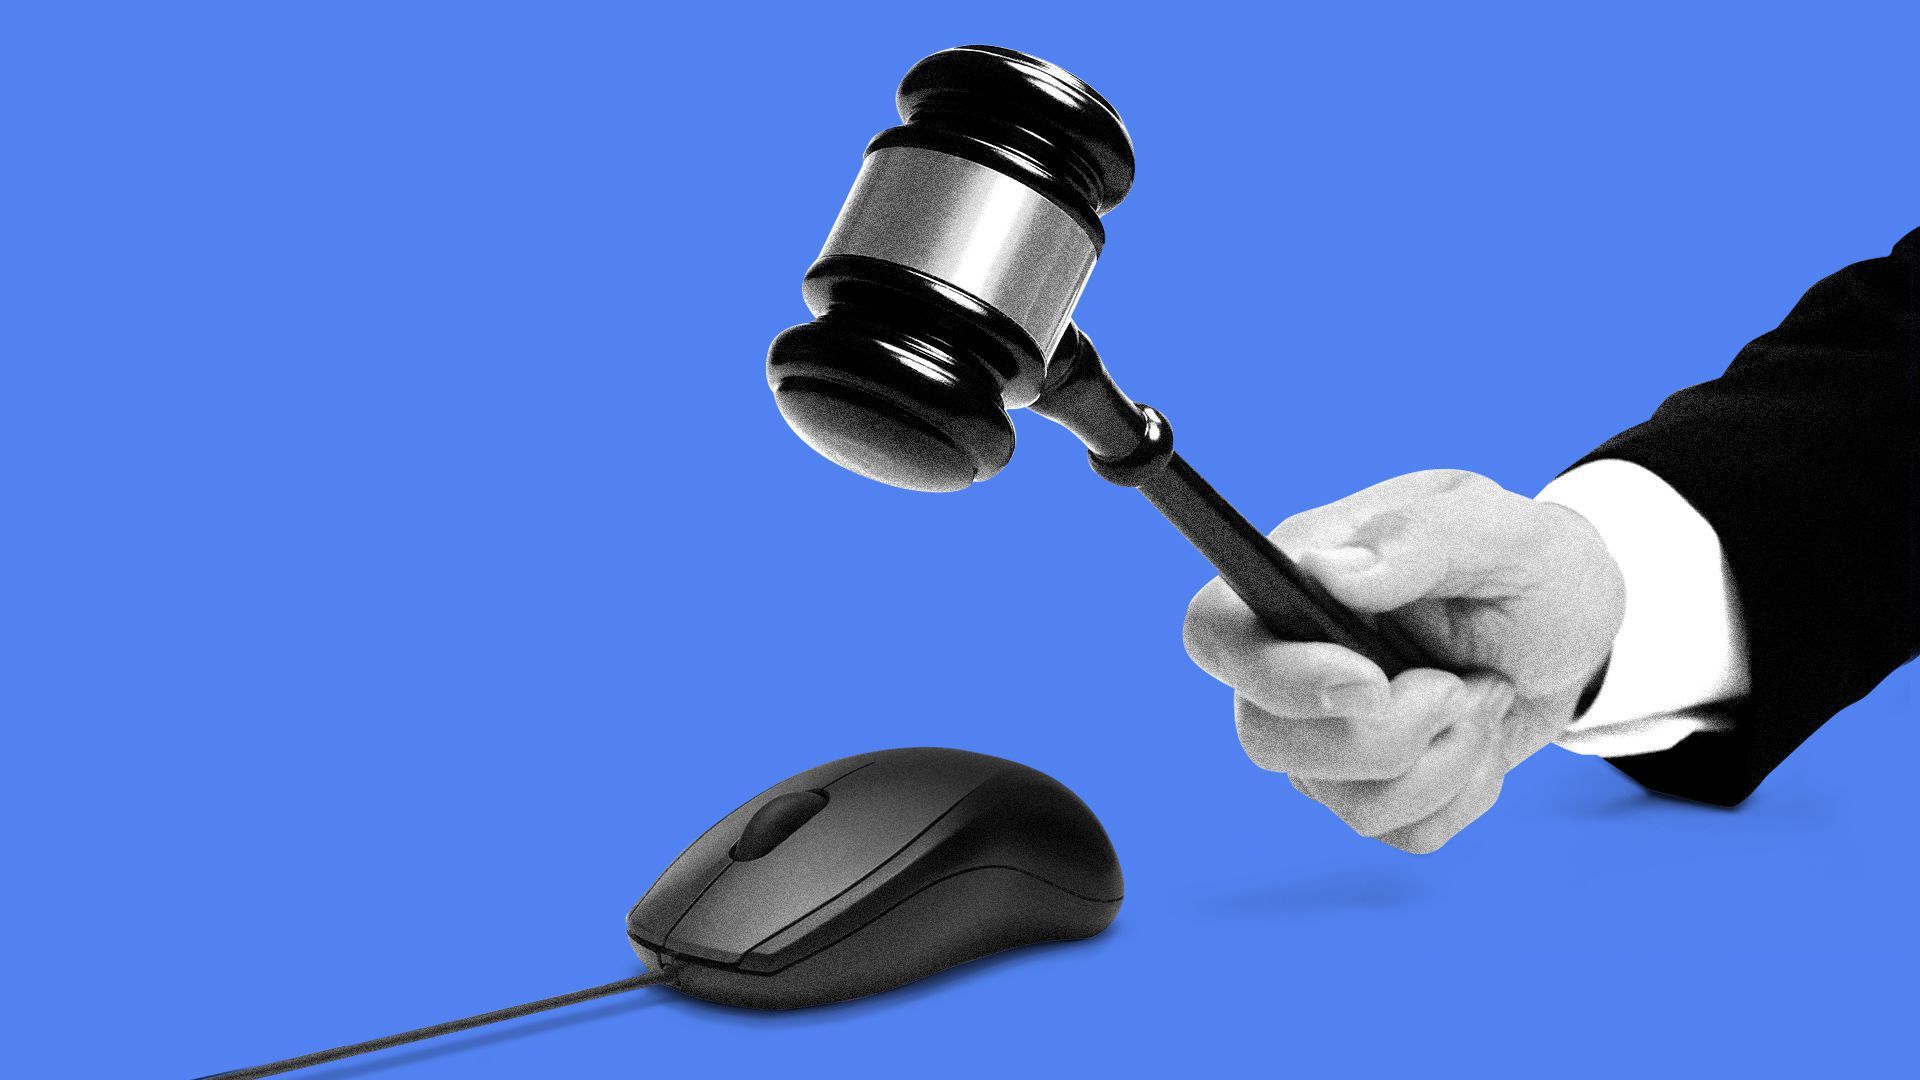 Illustration of a gavel coming down on a computer mouse